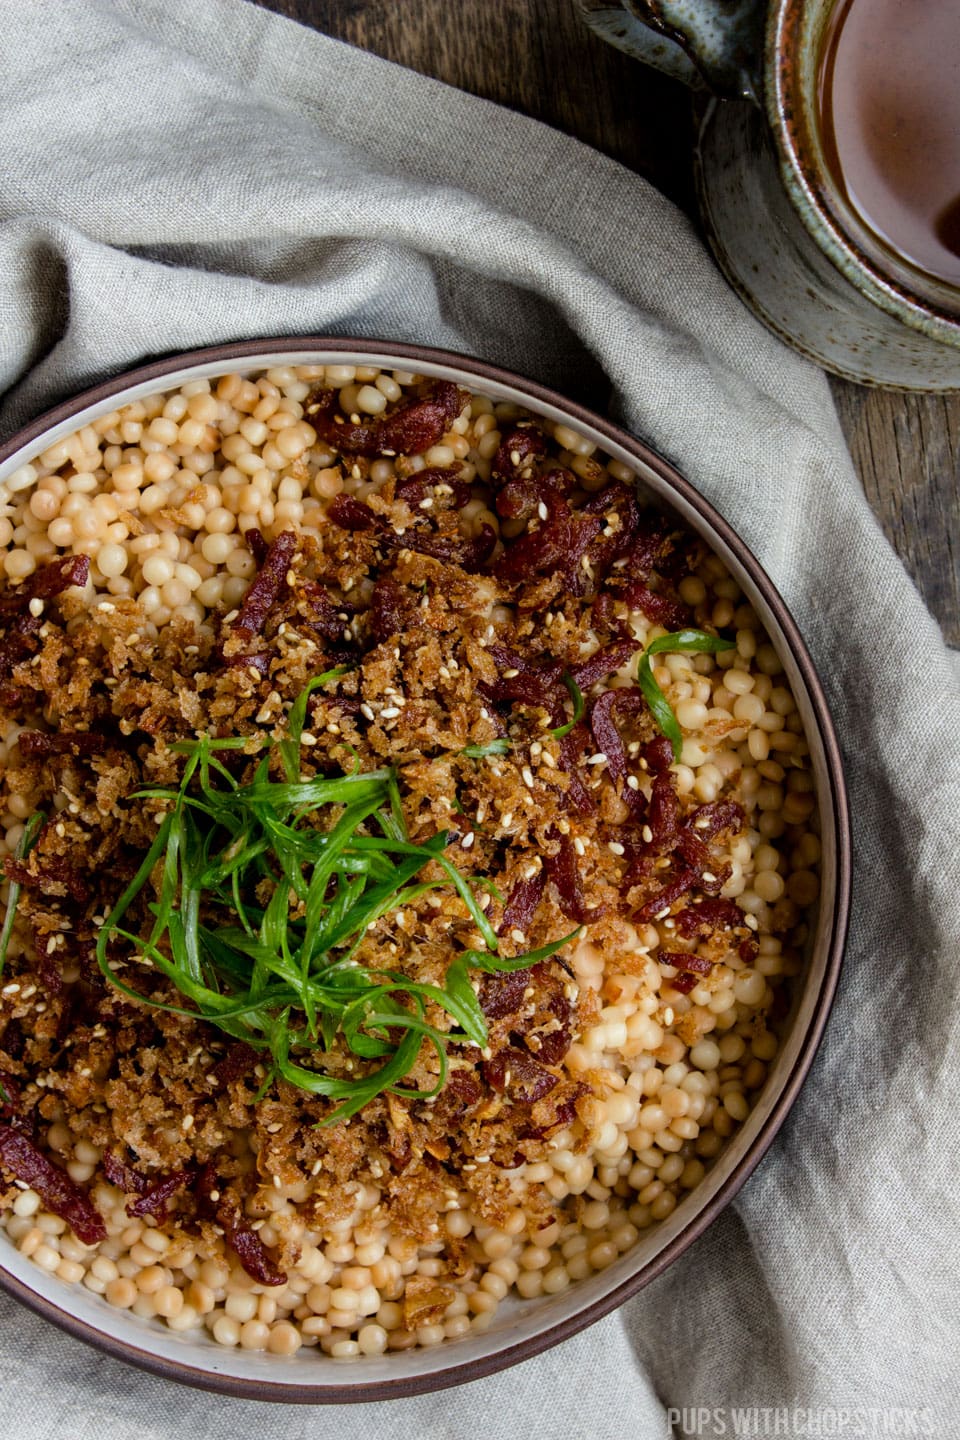 An deliciously nutty and flavourful israeli couscous recipe with a bit of a chew, generously topped with crispy garlic anchovy bread crumbs. Works great as a quick and easy side dish or a one bowl meal! #couscous #sidedish #recipe #salad #crispy